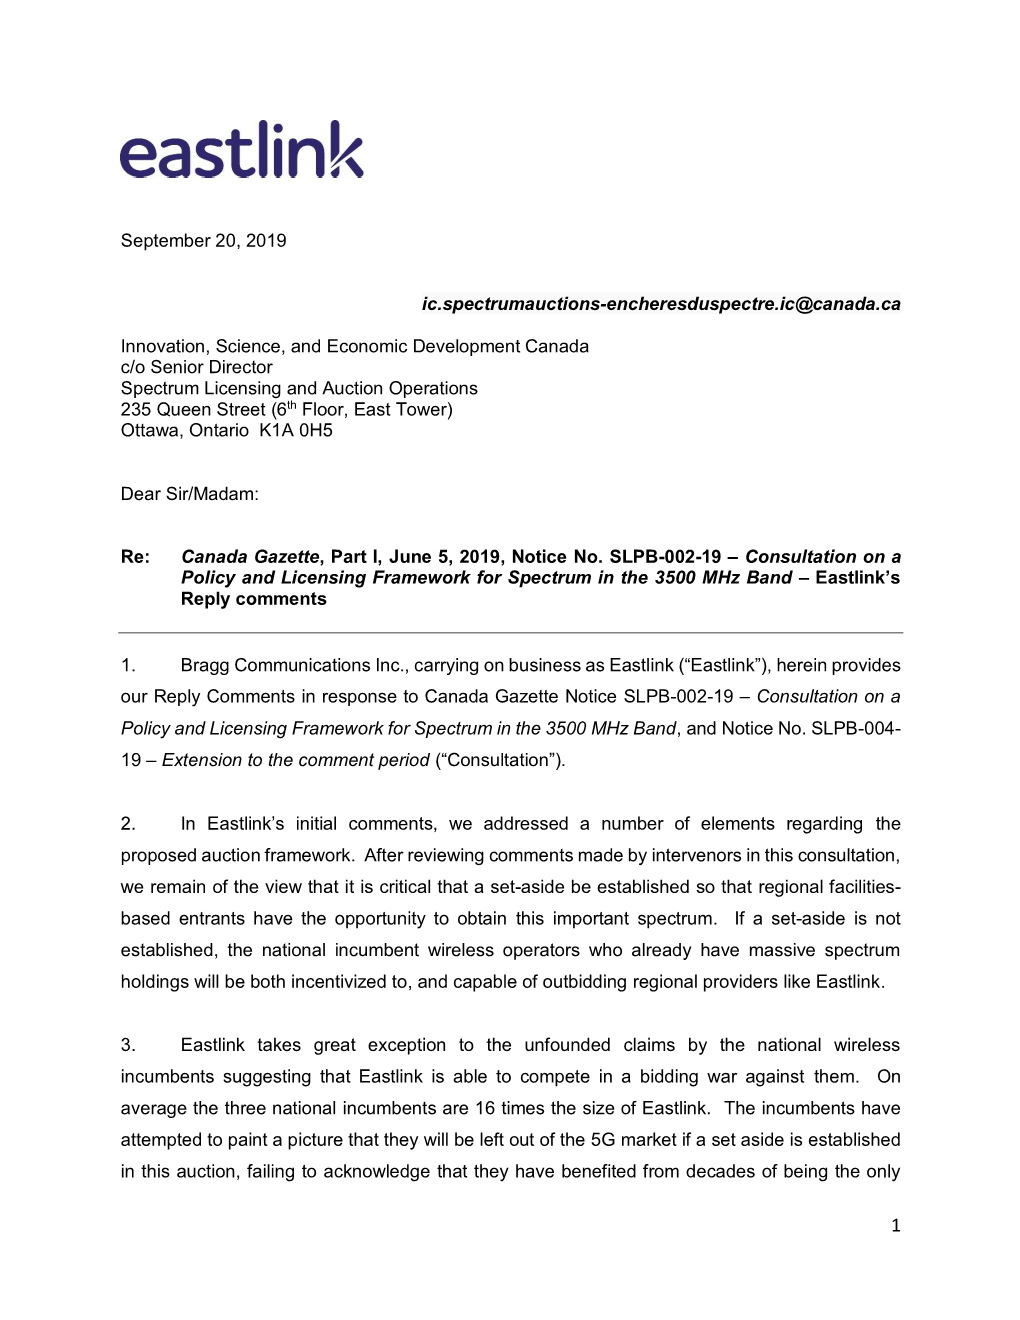 Eastlink’S Reply Comments